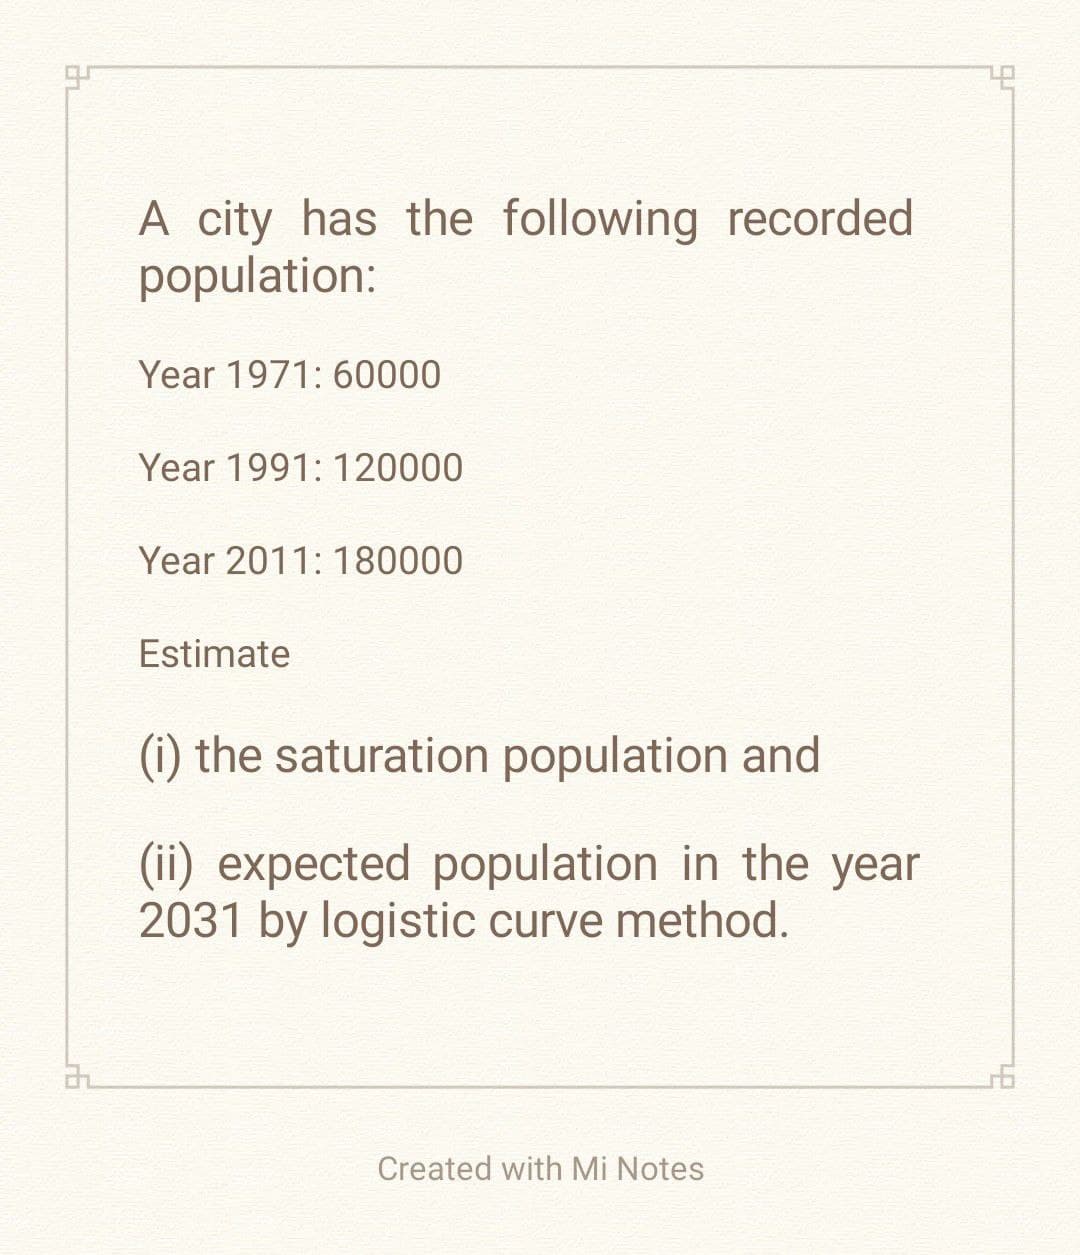 32
A city has the following recorded
population:
Year 1971: 60000
Year 1991: 120000
Year 2011: 180000
Estimate
(i) the saturation population and
(ii) expected population in the year
2031 by logistic curve method.
Created with Mi Notes